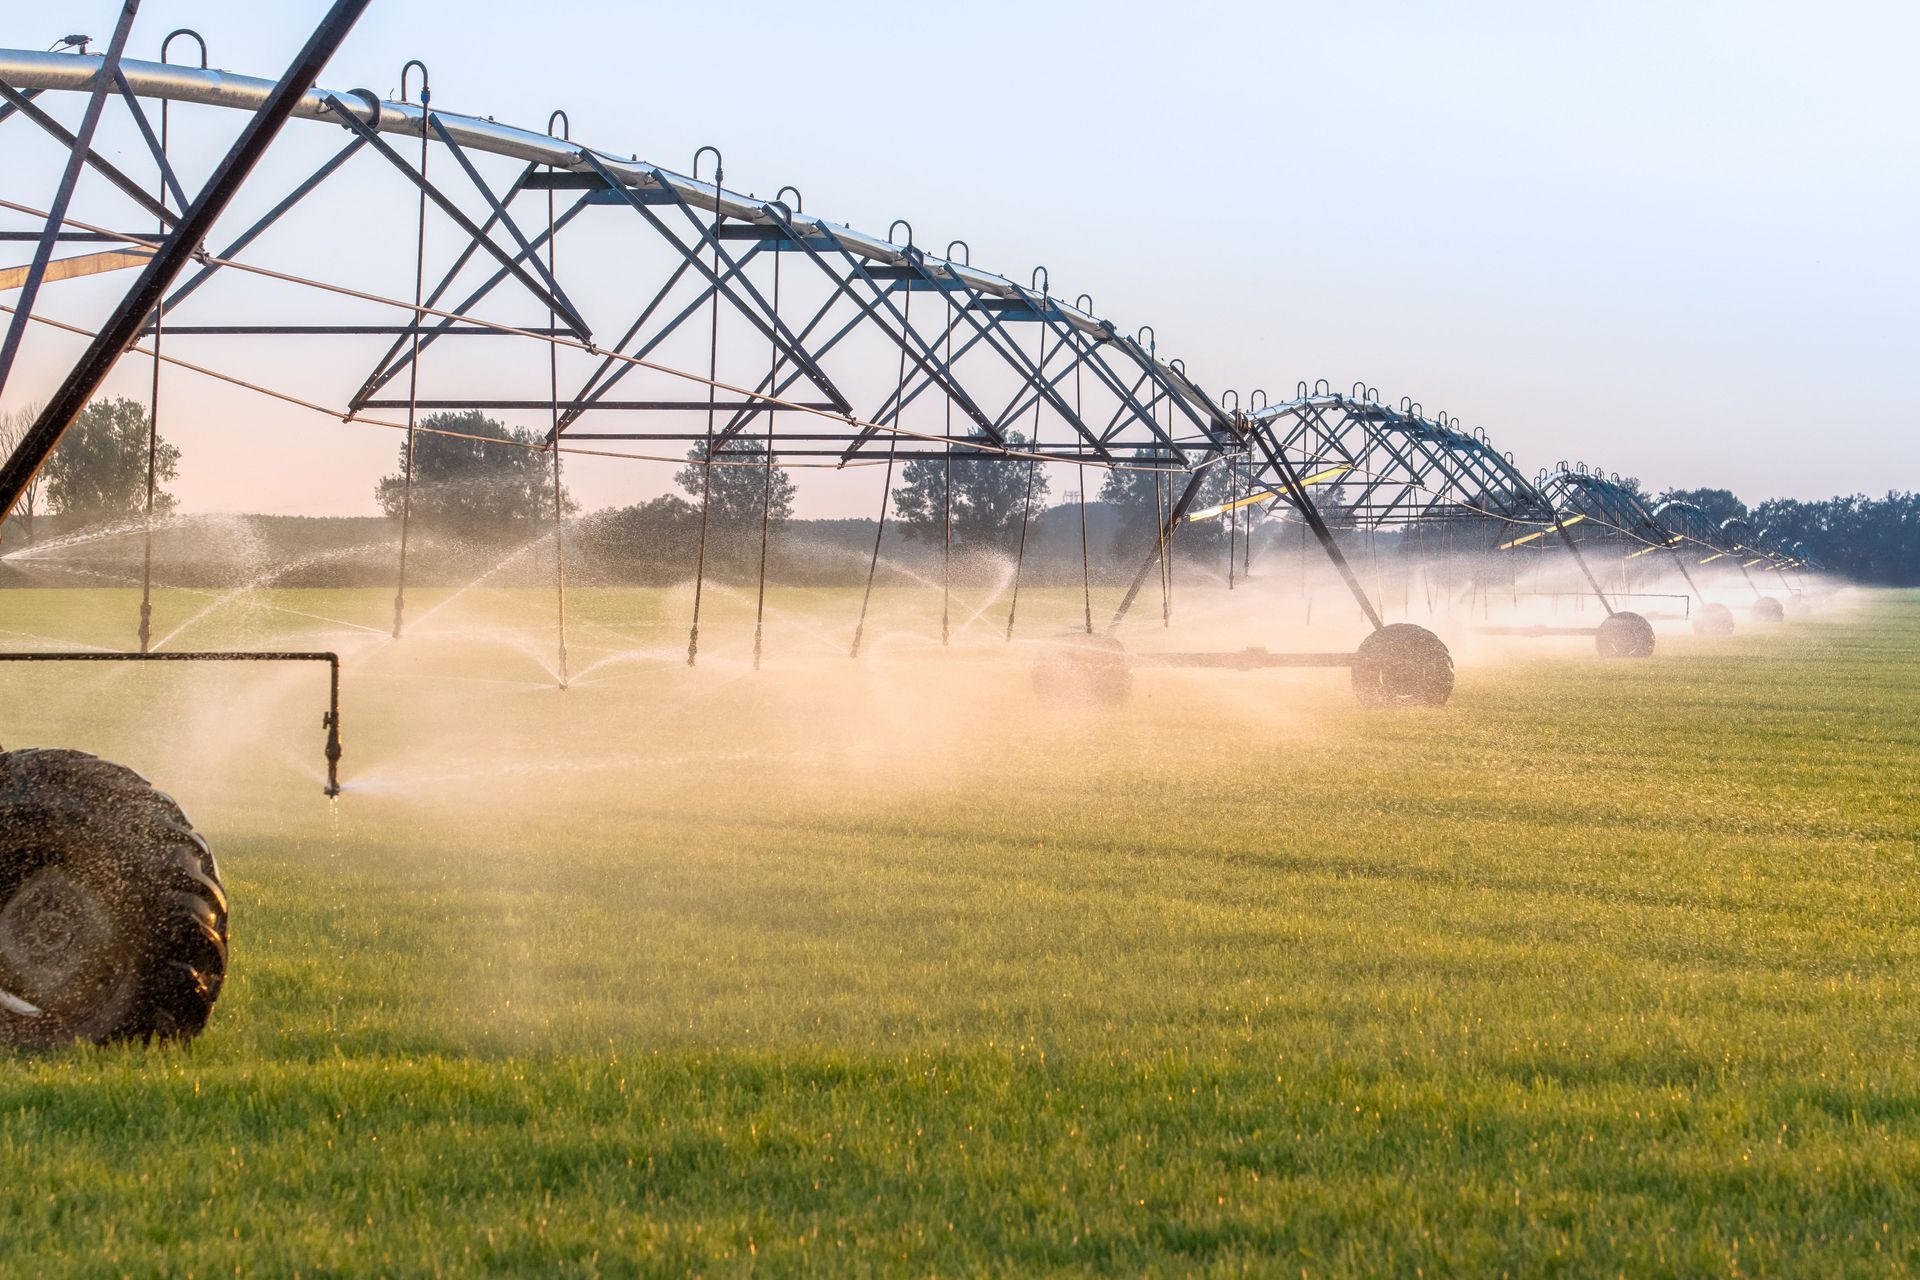 Center pivot irrigation system watering crops on multi acre farm.